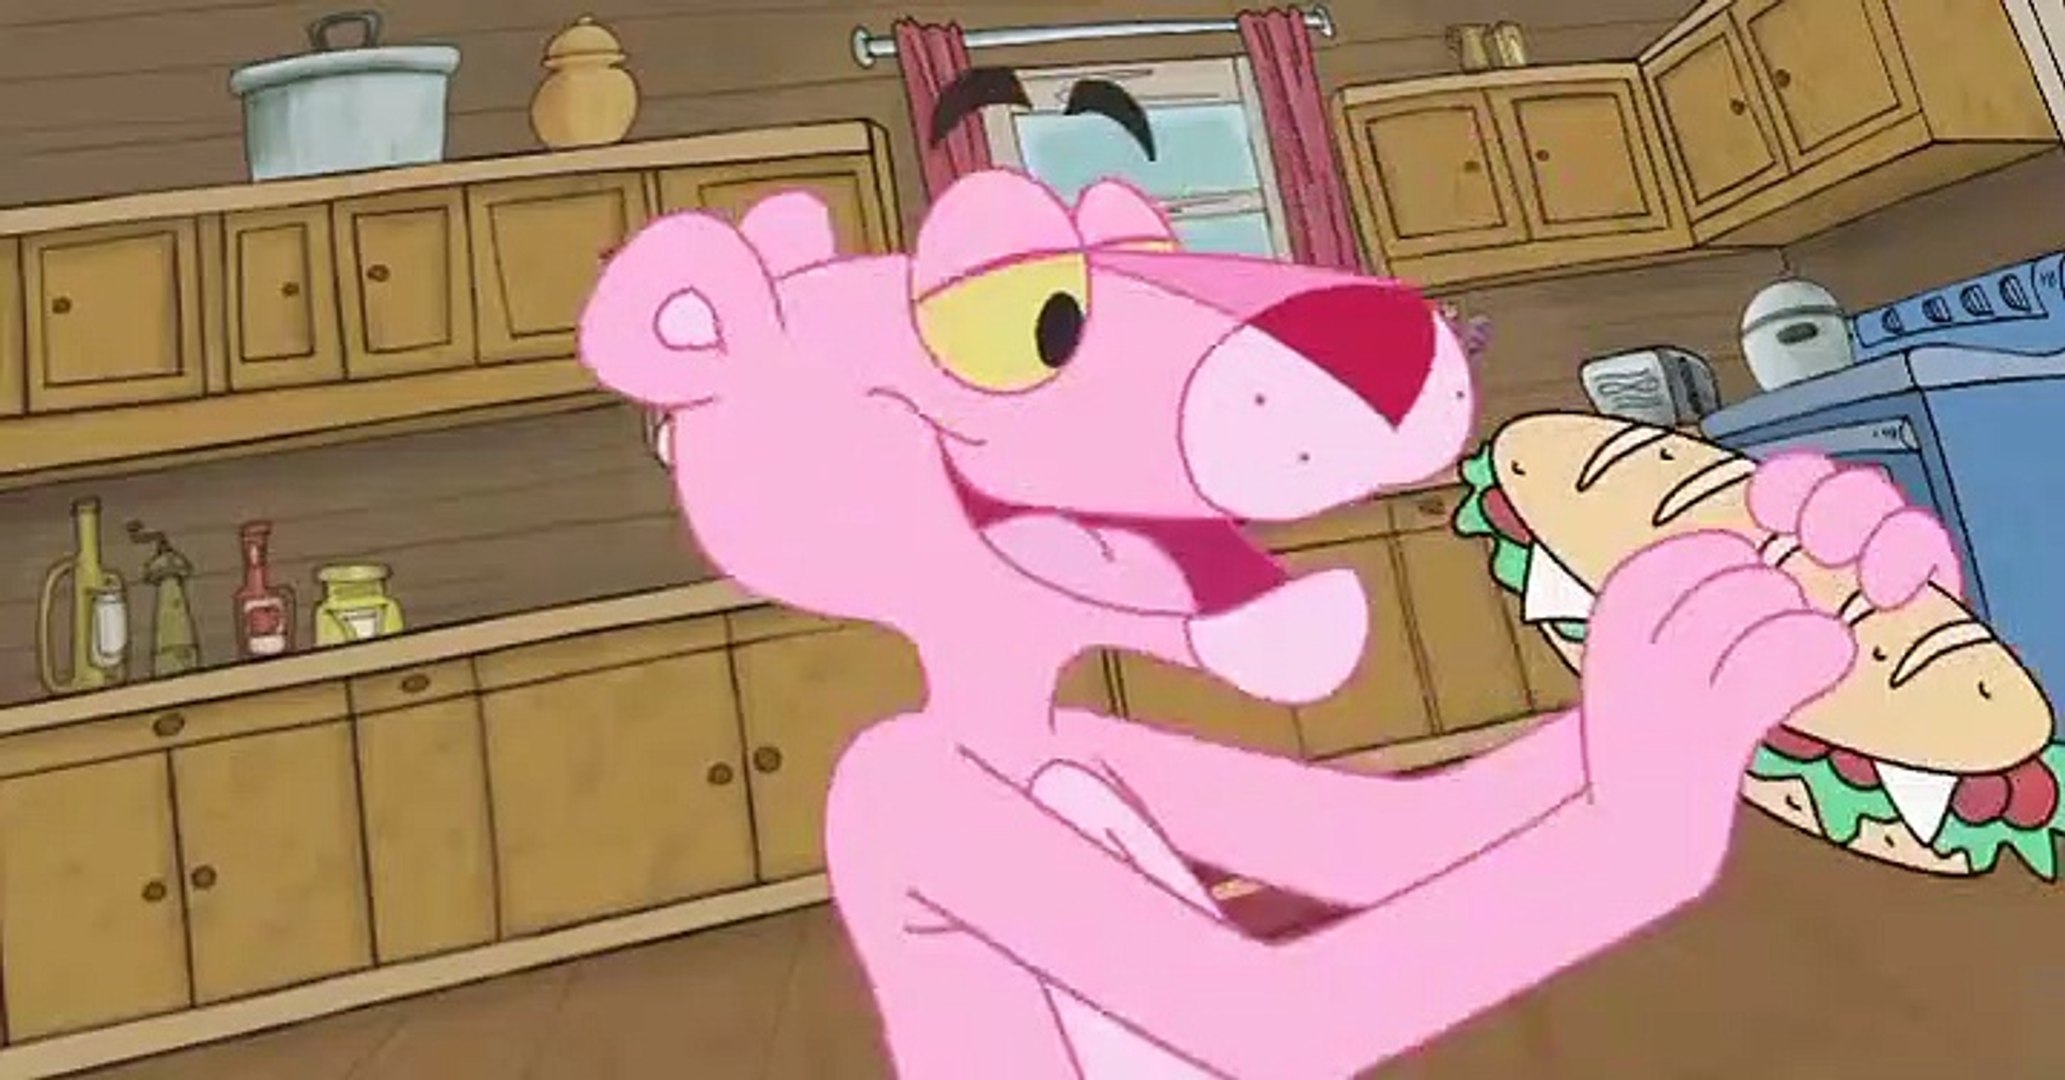 Watch Pink Panther and Pals